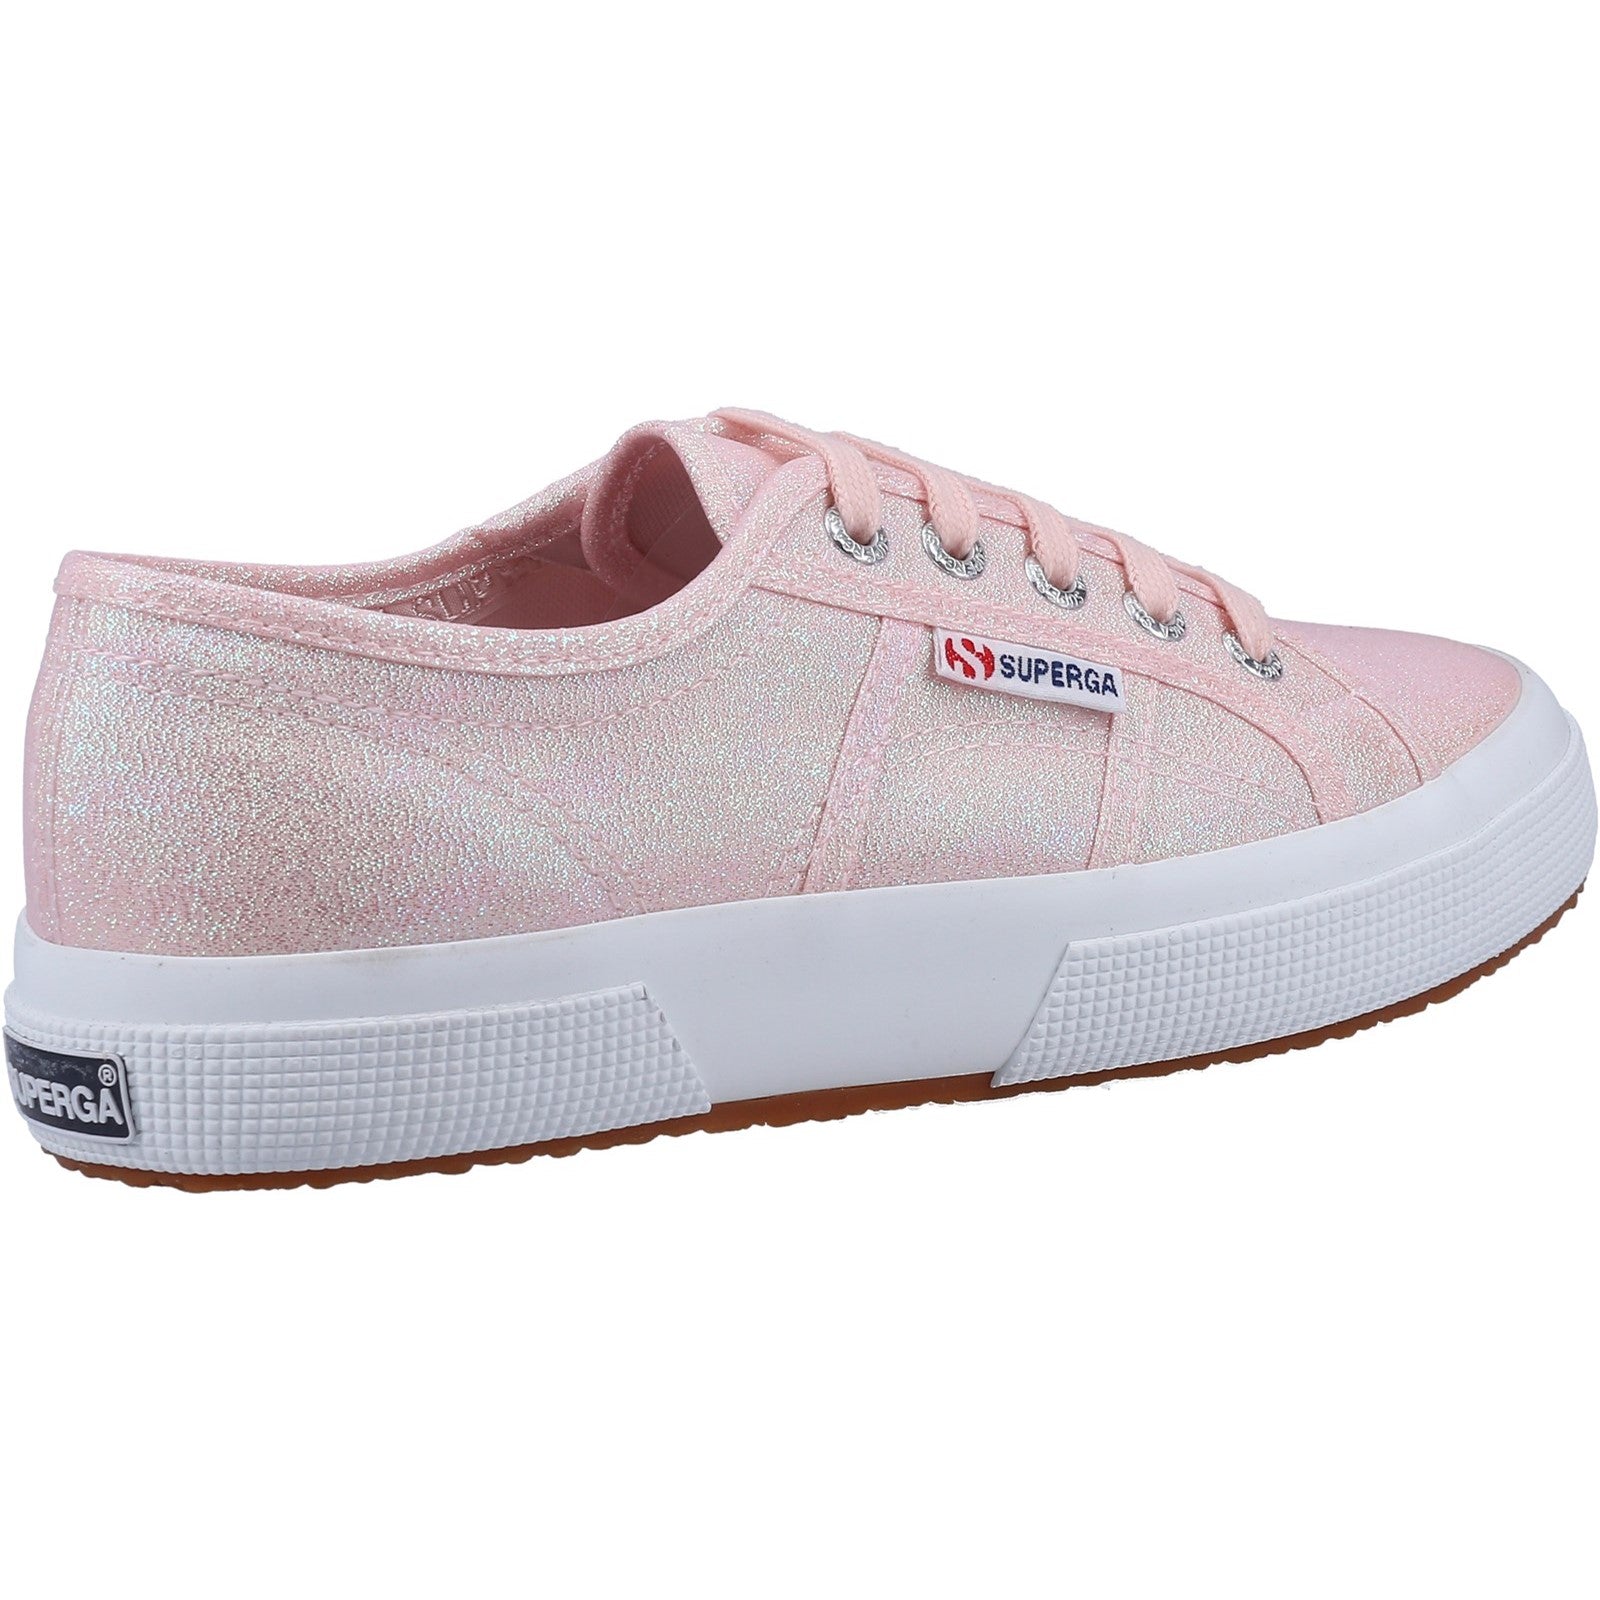 Superga Womens 2750 Lamé Trainers - Pink